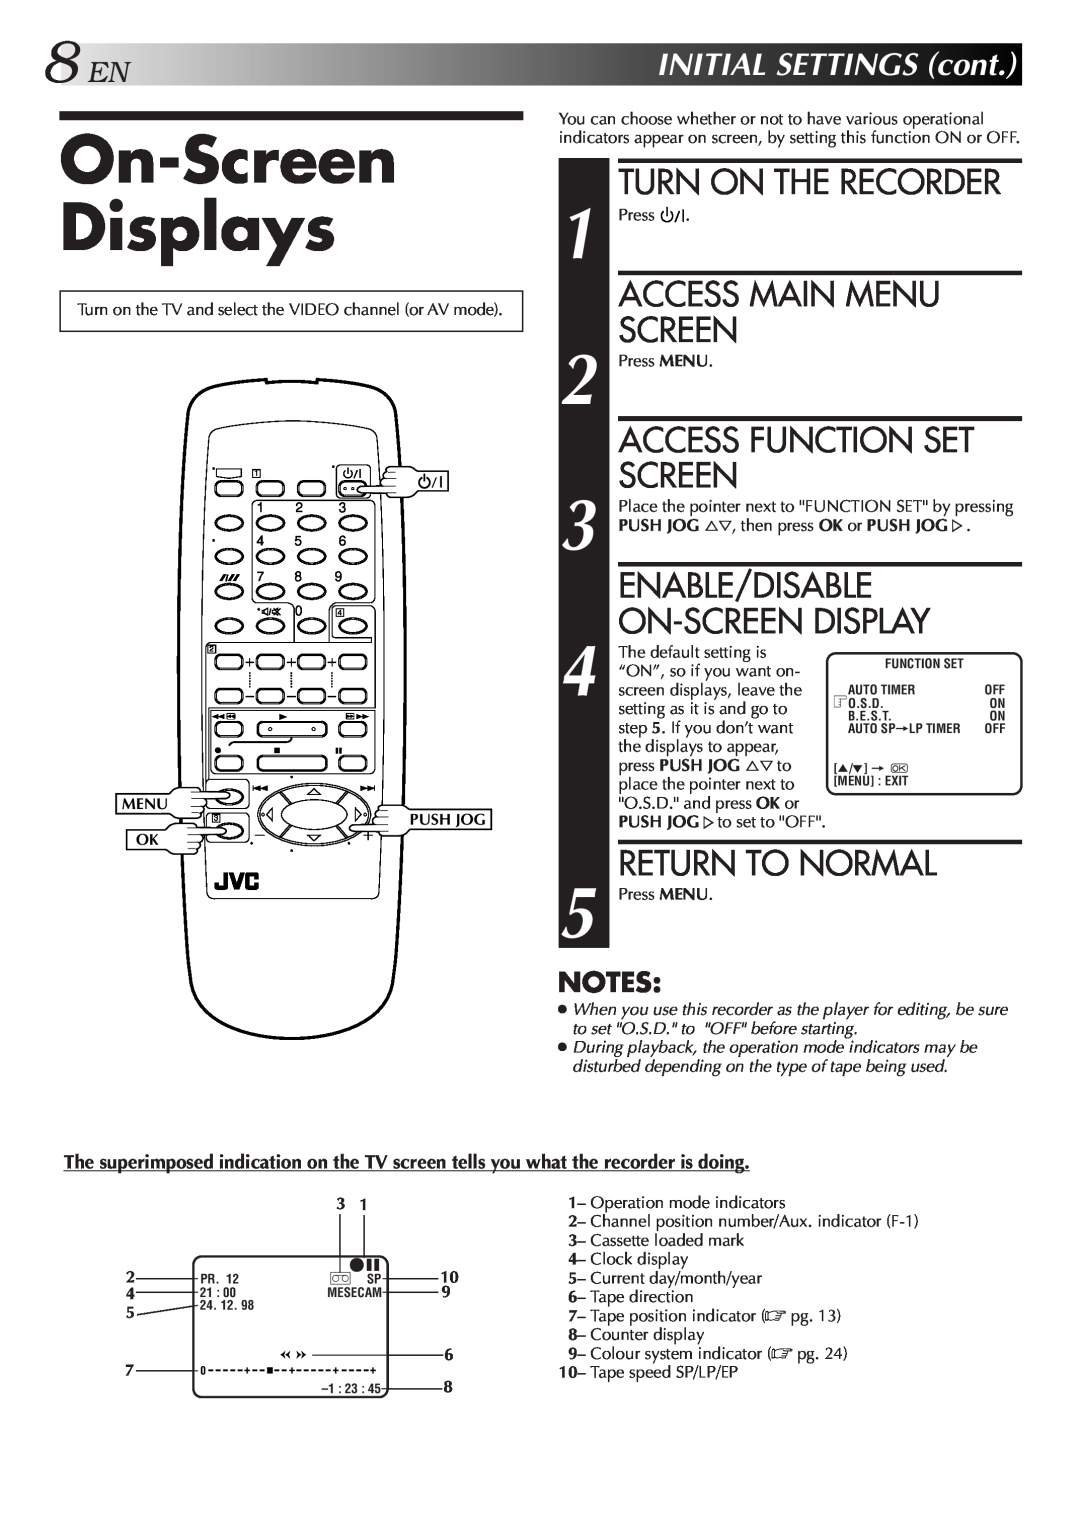 JVC HR-J457MS specifications On-Screen Displays, Turn On The Recorder, Access Main Menu, Enable/Disable, Return To Normal 